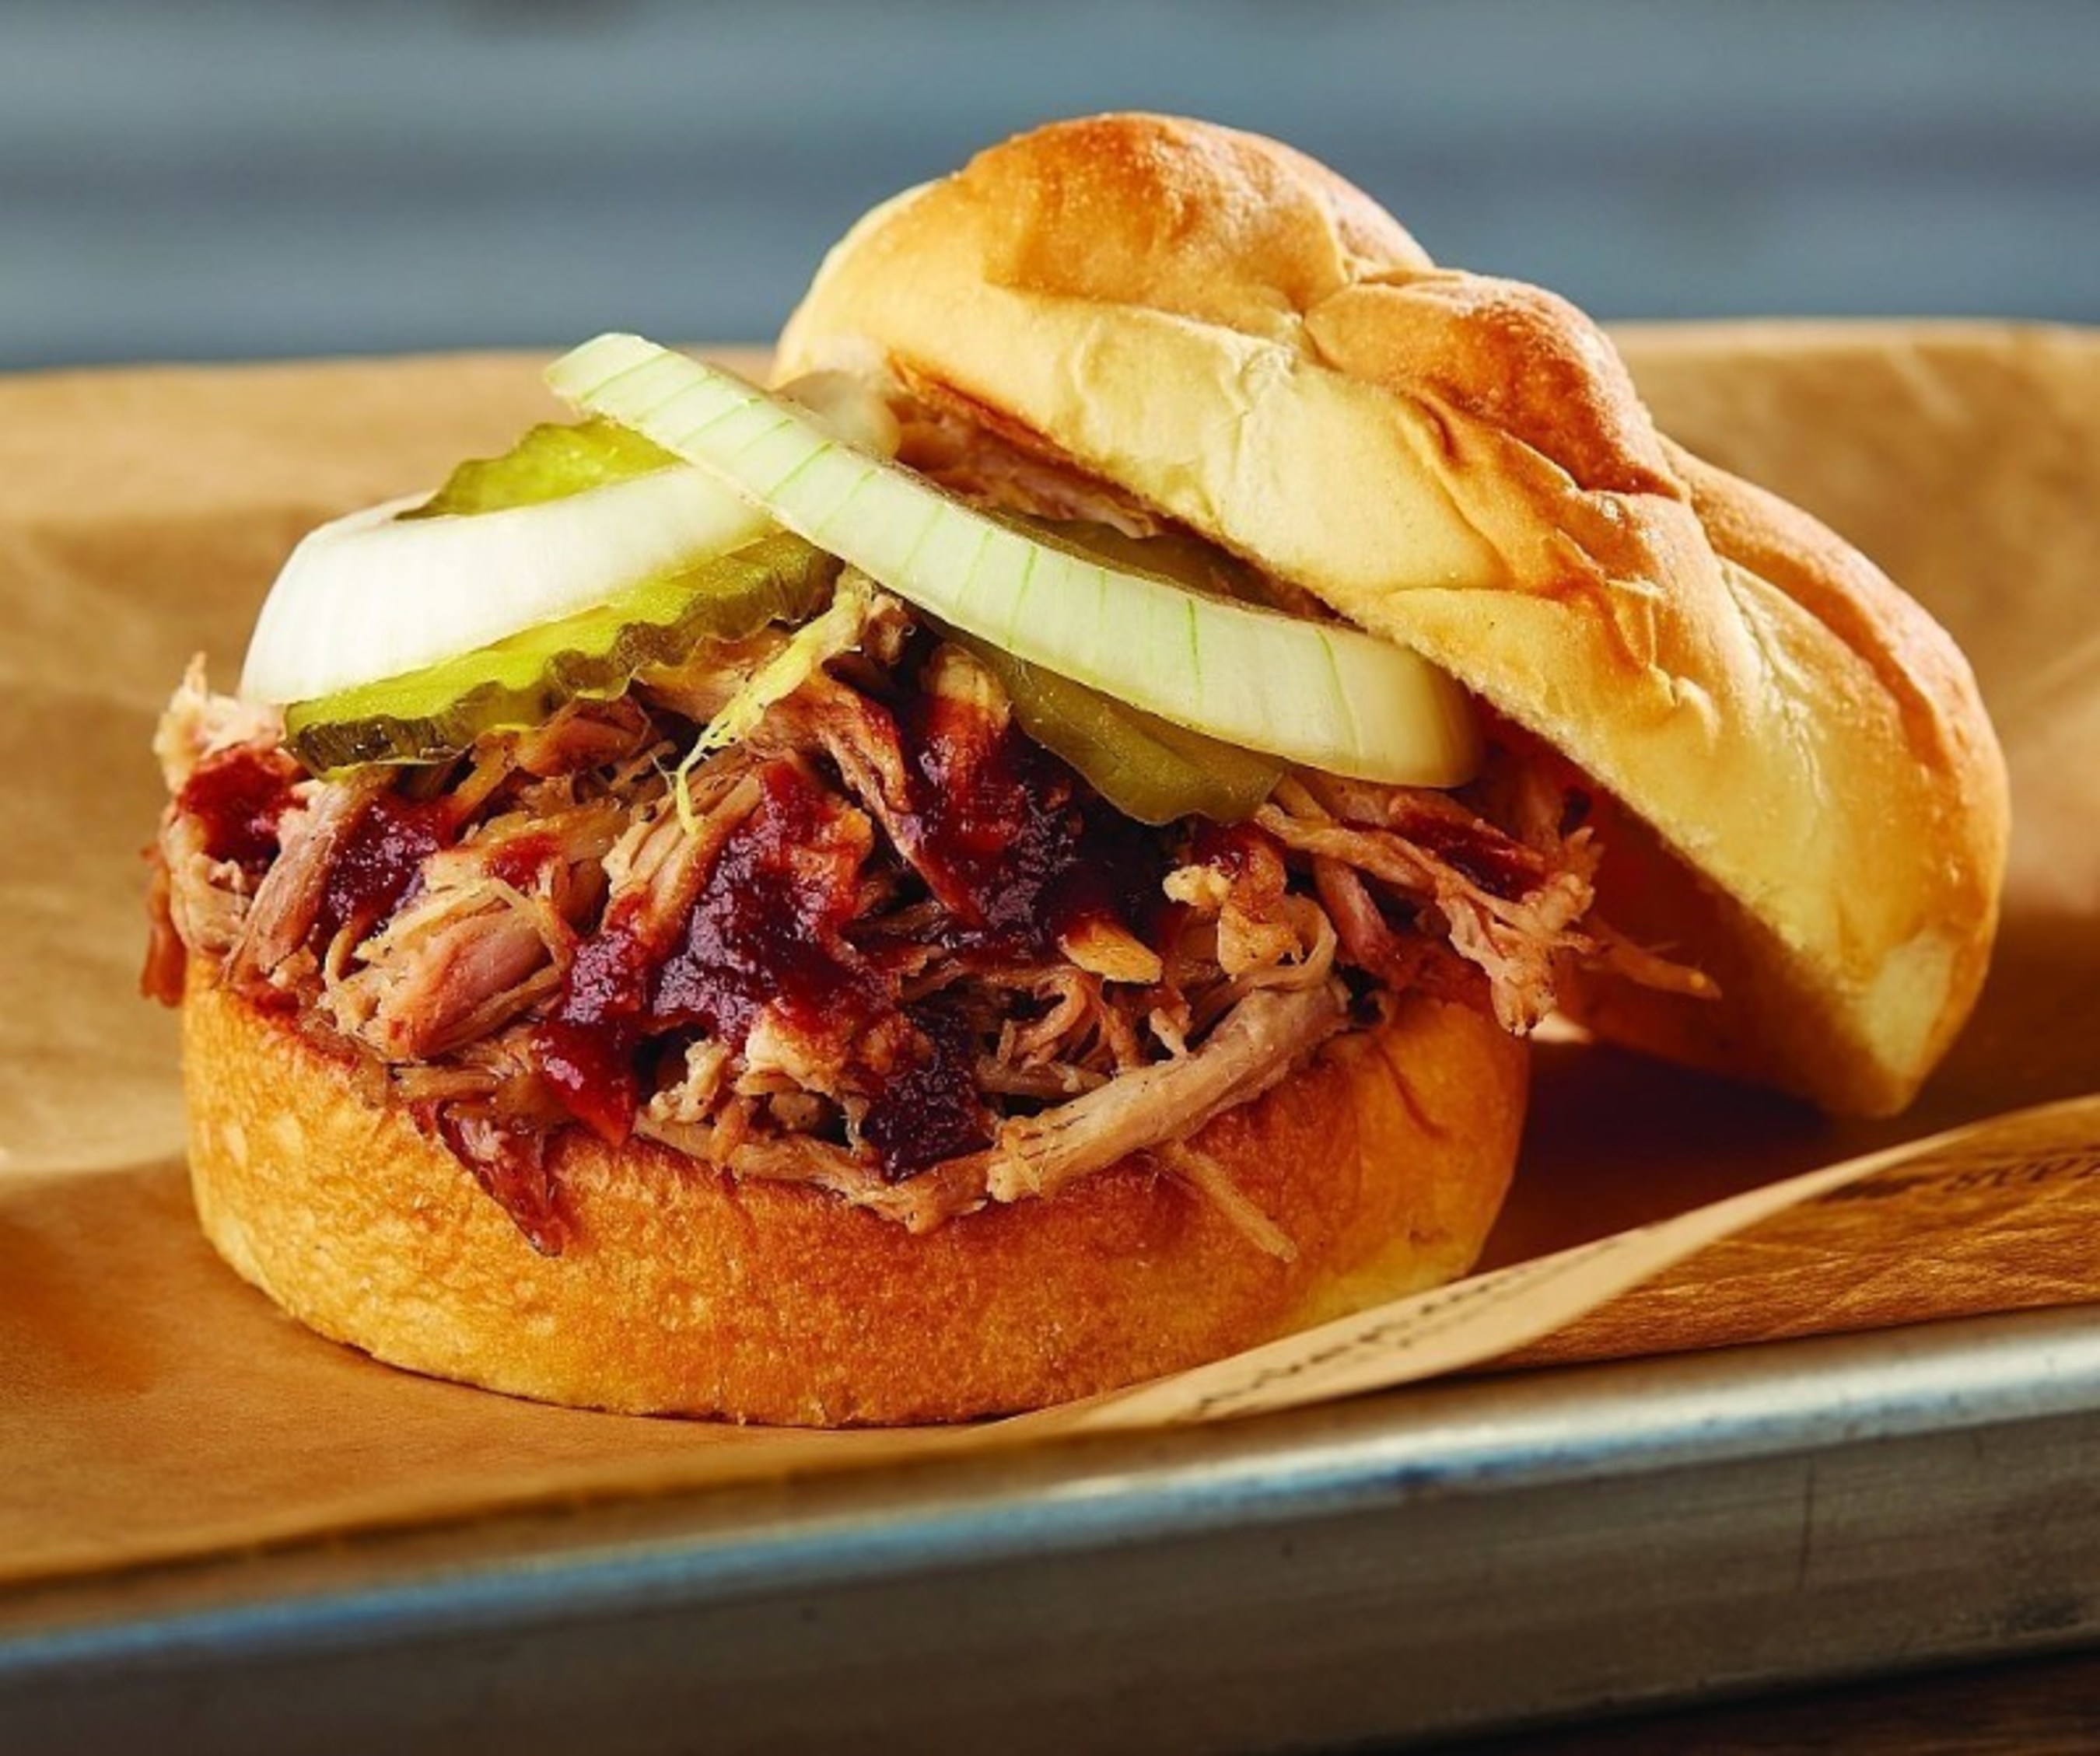 Dickey's Barbecue Pit opens Thursday in Victorville with a three day grand opening. Celebration includes $2 pulled pork sandwiches, three free barbecue for a year prizes and more barbecue giveaways.